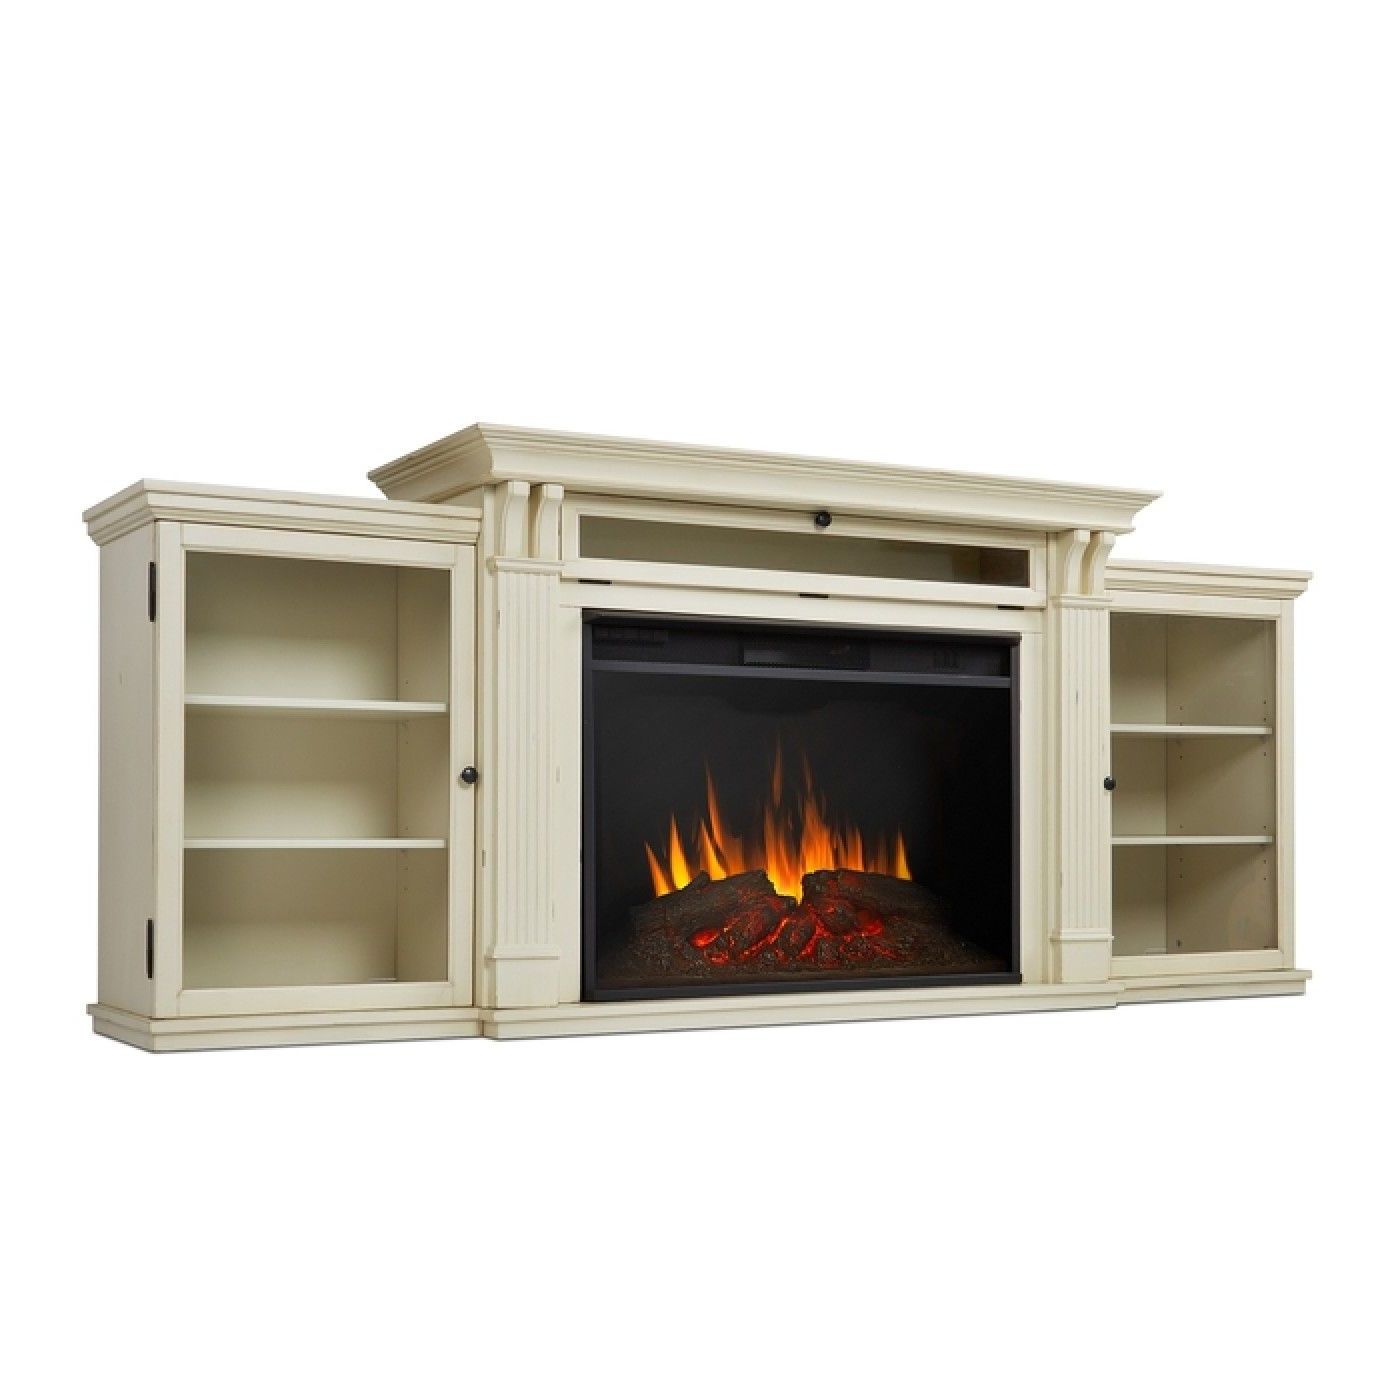 Realflame Tracey Grand Distressed White Media Electric With Regard To Fireplace Media Console Tv Stands With Weathered Finish (View 16 of 20)